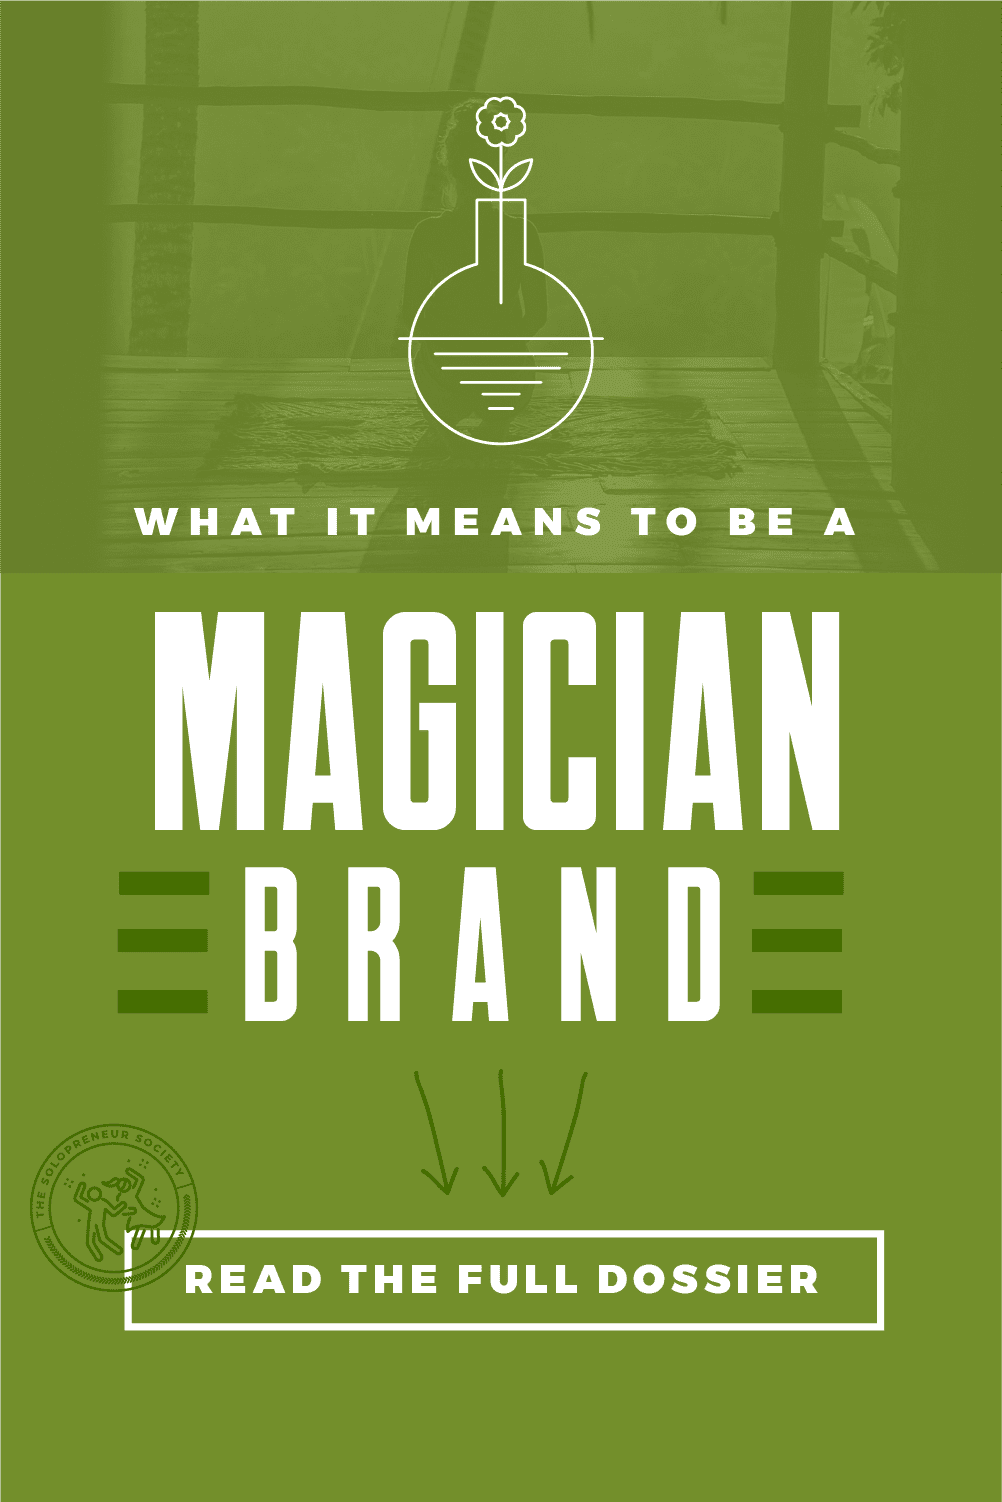 Magician Archetype Brand Personality